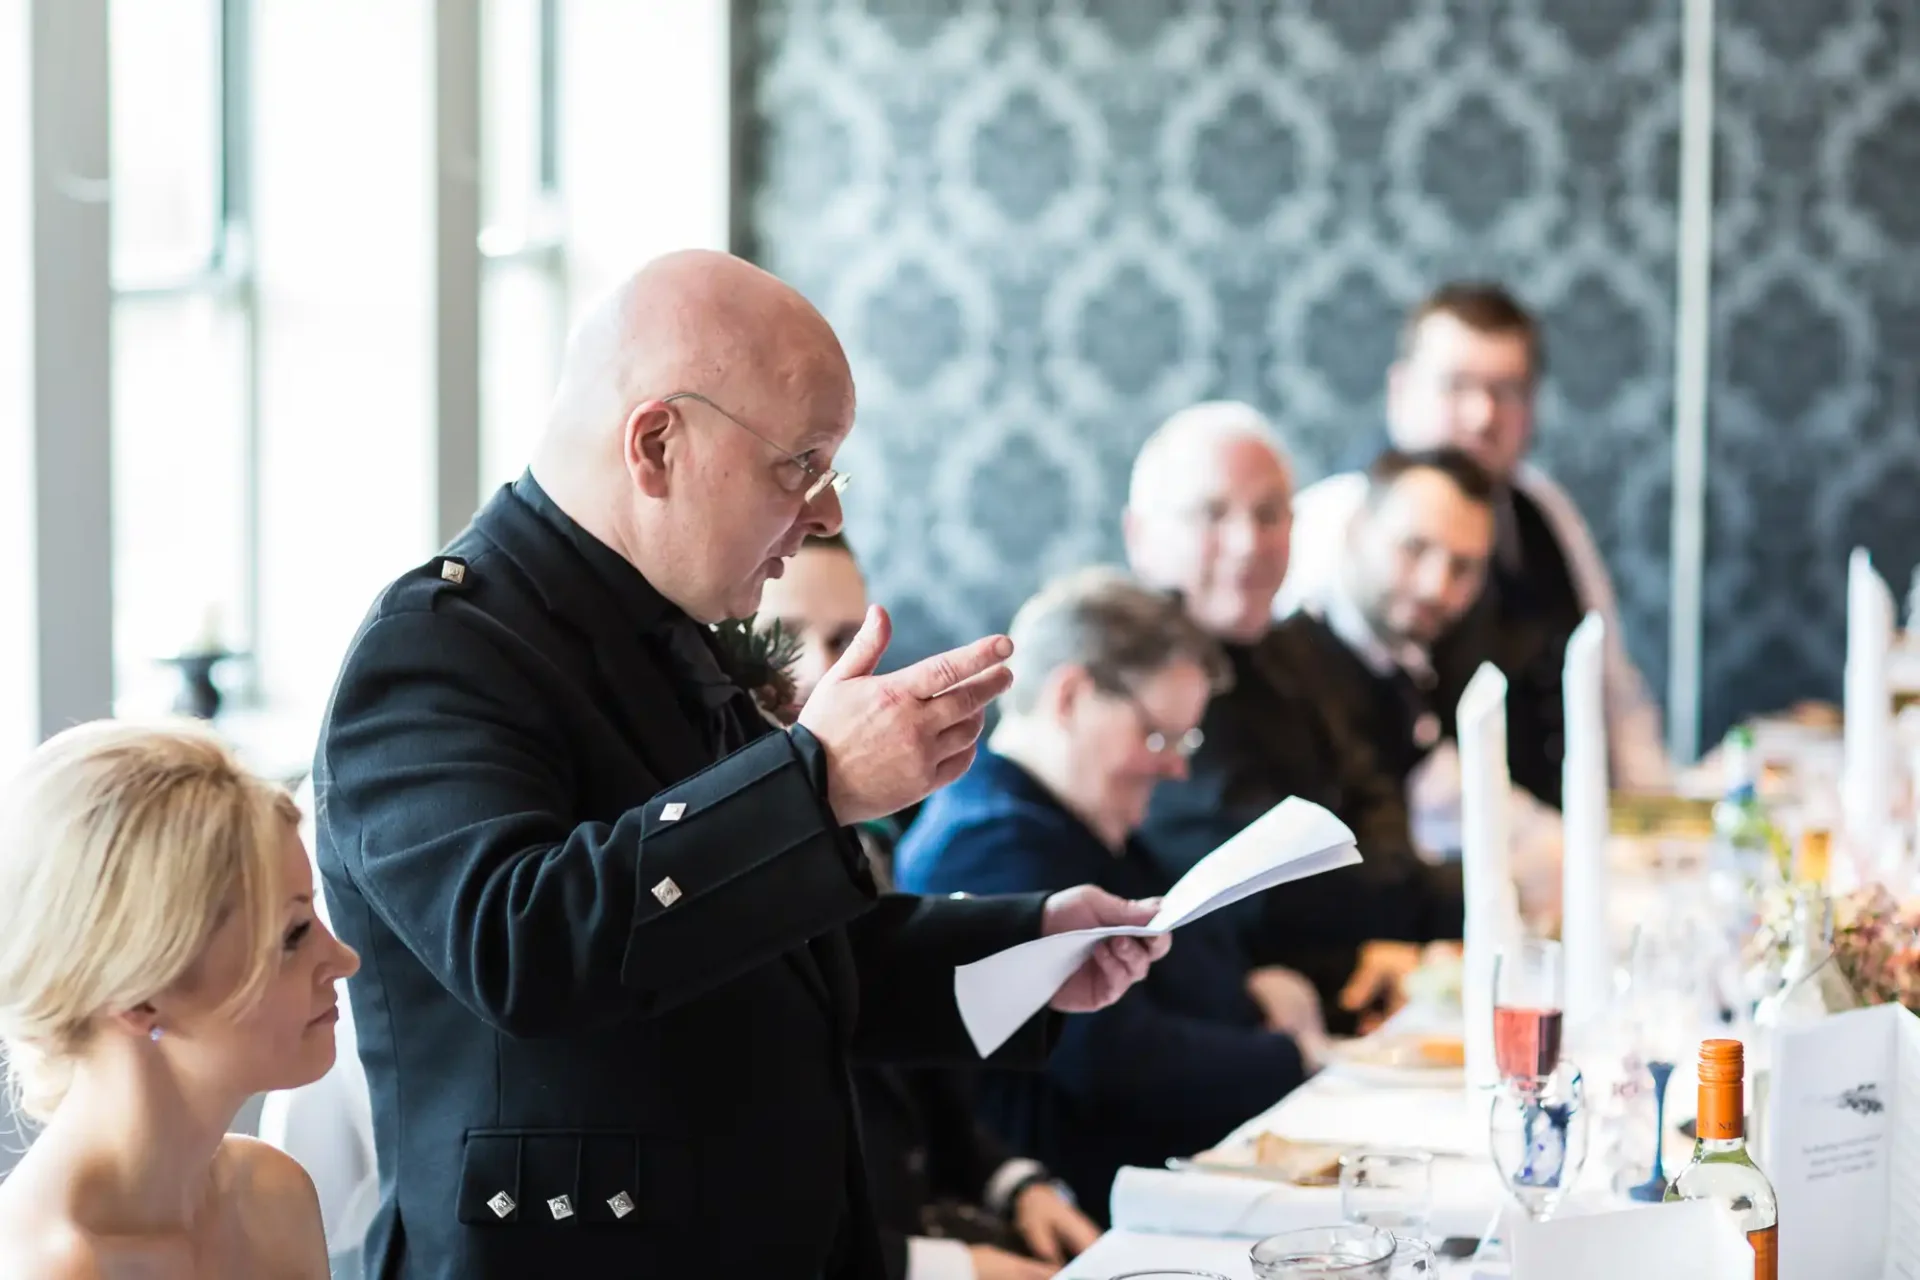 A bald man in a formal uniform speaking and gesturing with a paper at a dinner table, with a focus on seated guests listening.